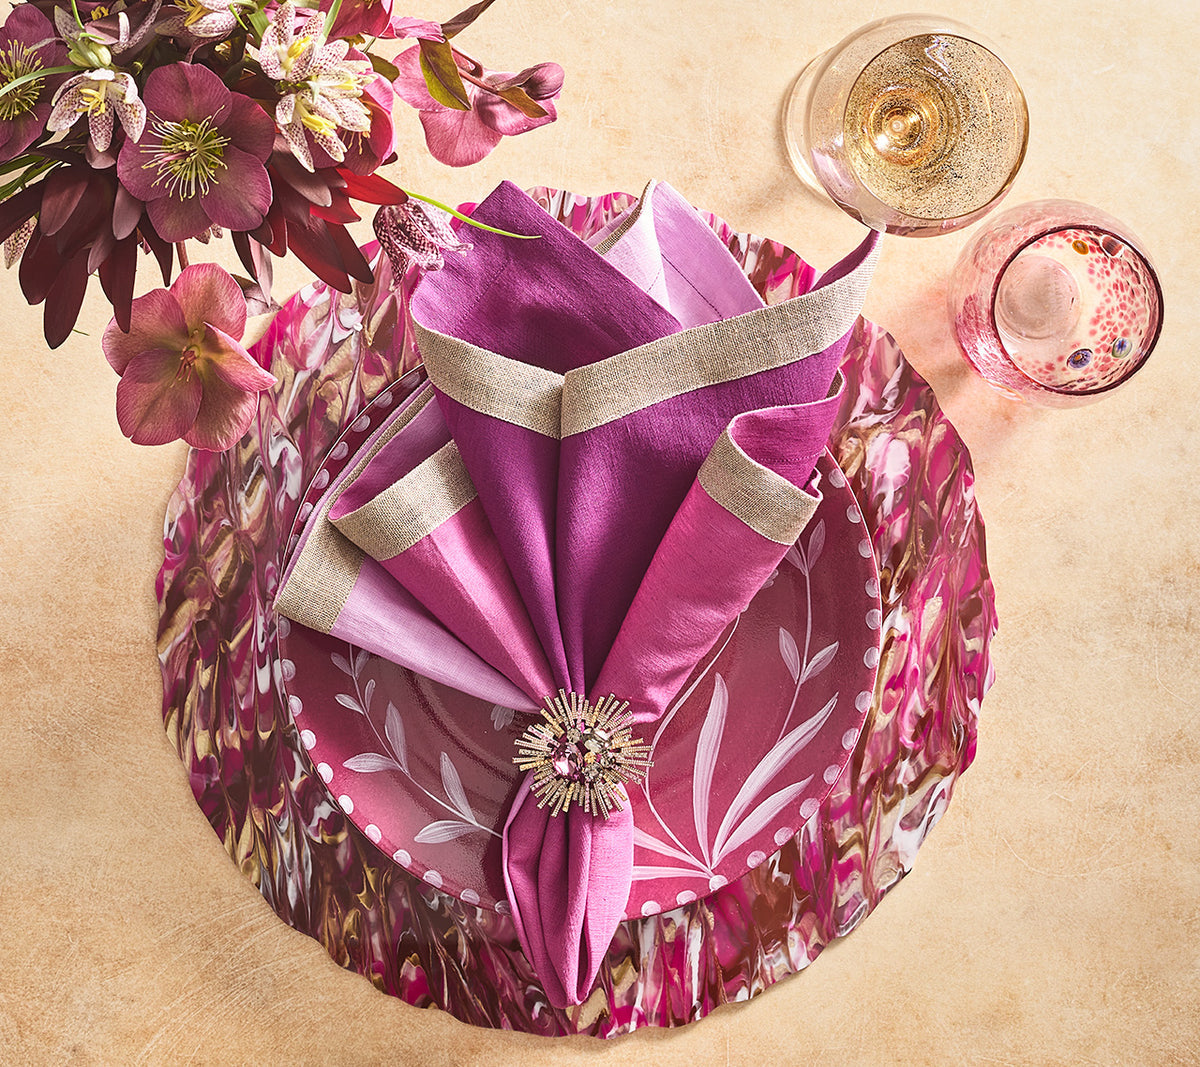 Bijoux Napkin Ring in Plum & Gold, Set of 4 in a Gift Box